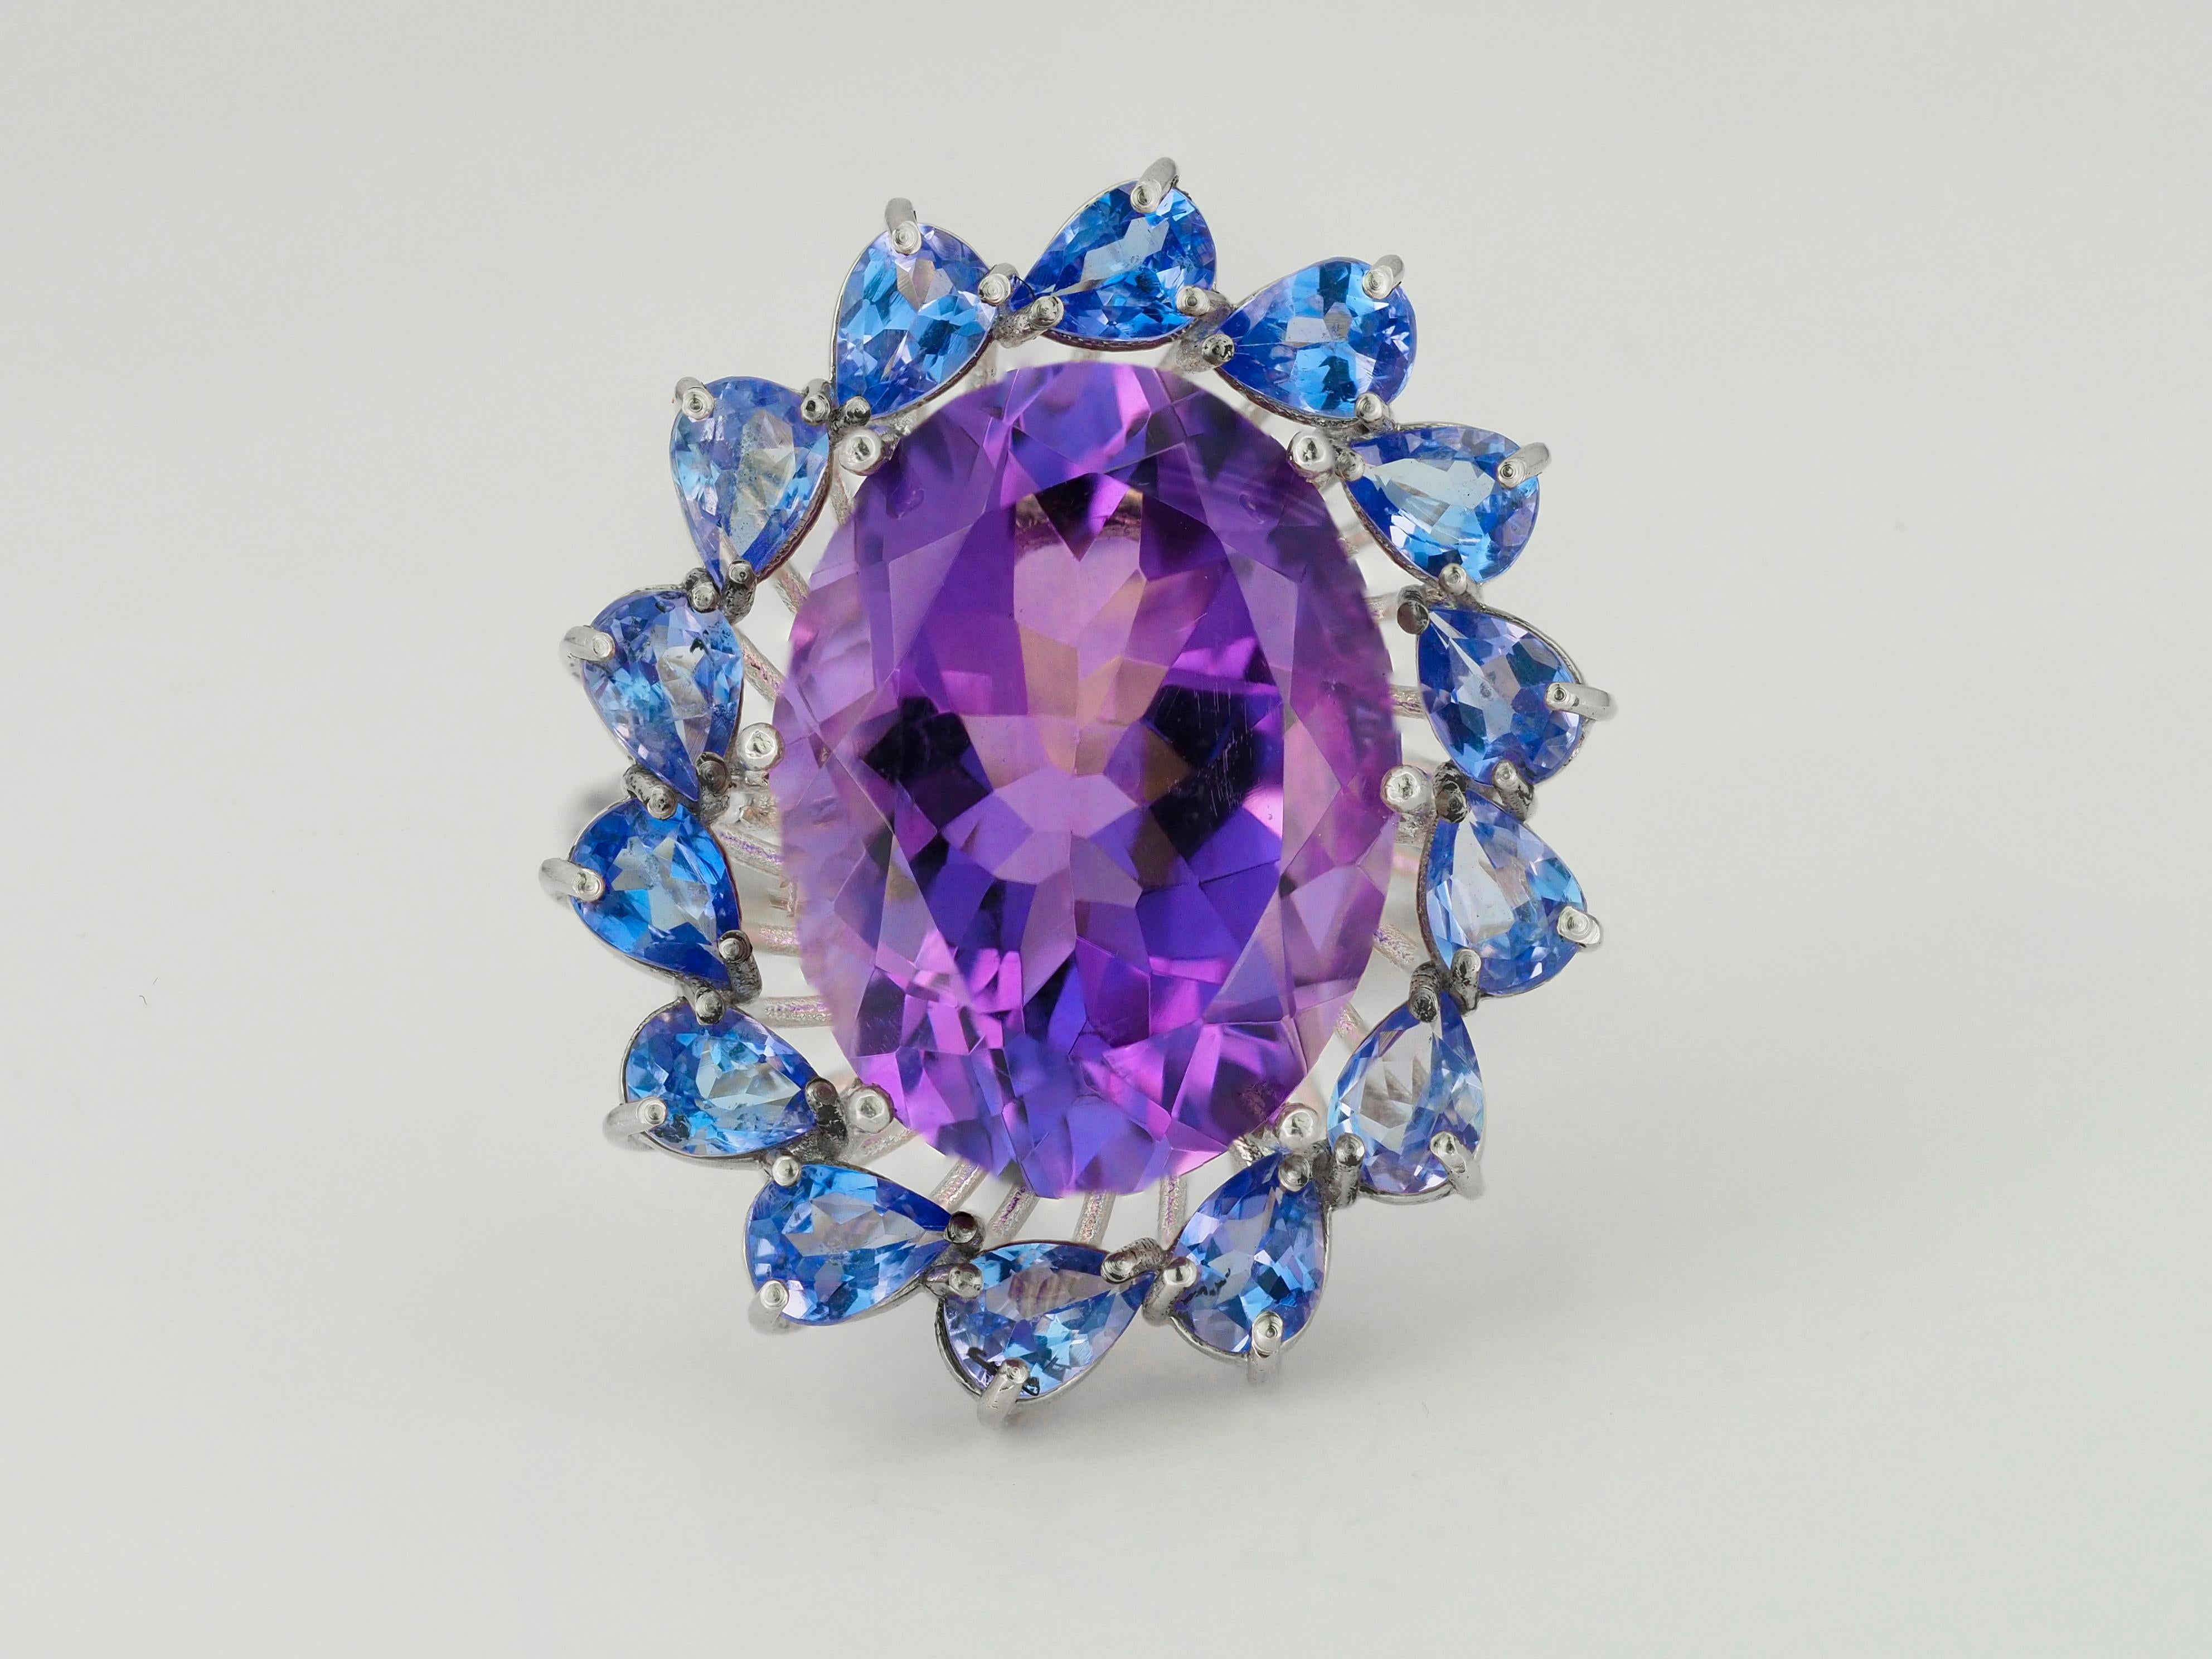 14 kt solid massive flower ring with natural amethyst, tanzanites and diamonds. February birthstone. December birthstone ring. Amethyst, tanzanites 14k gold ring. Oval amethyst ring. 

Weight approx. 9 g. depends from size

Central gemstone: Natural